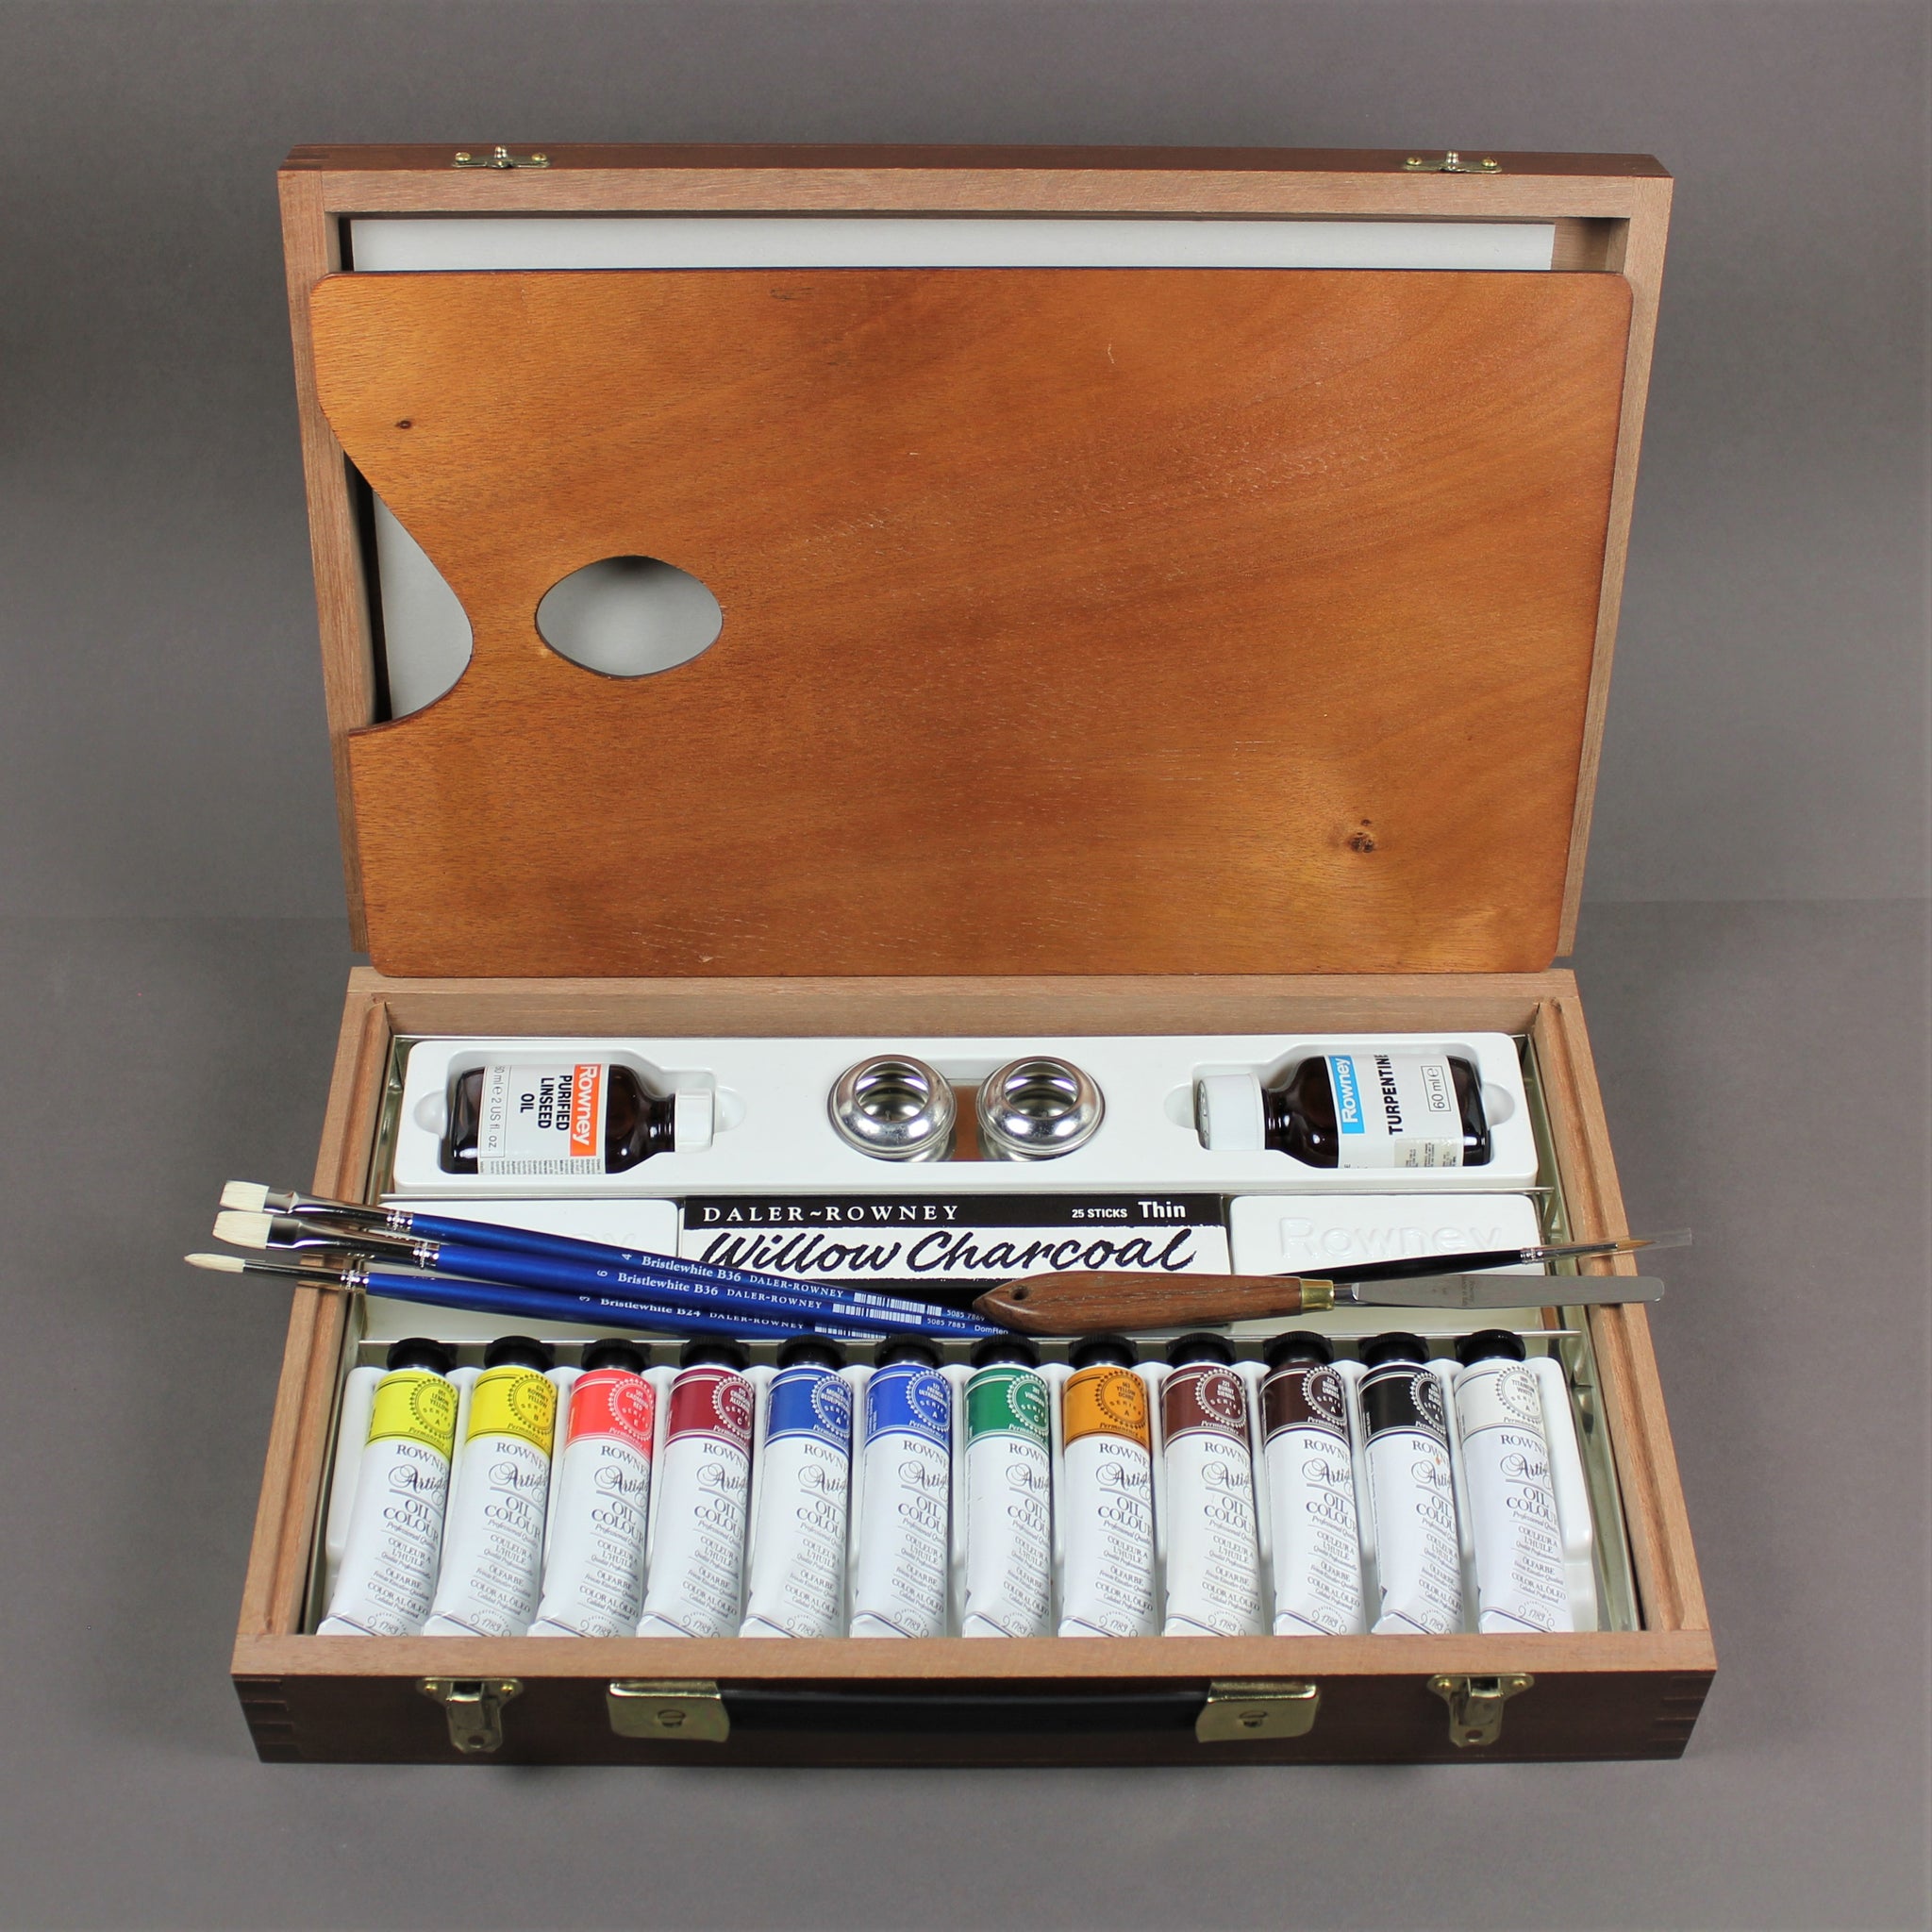 Artists Oil Paint Tubes Open and Used on a Wooden Palette, with